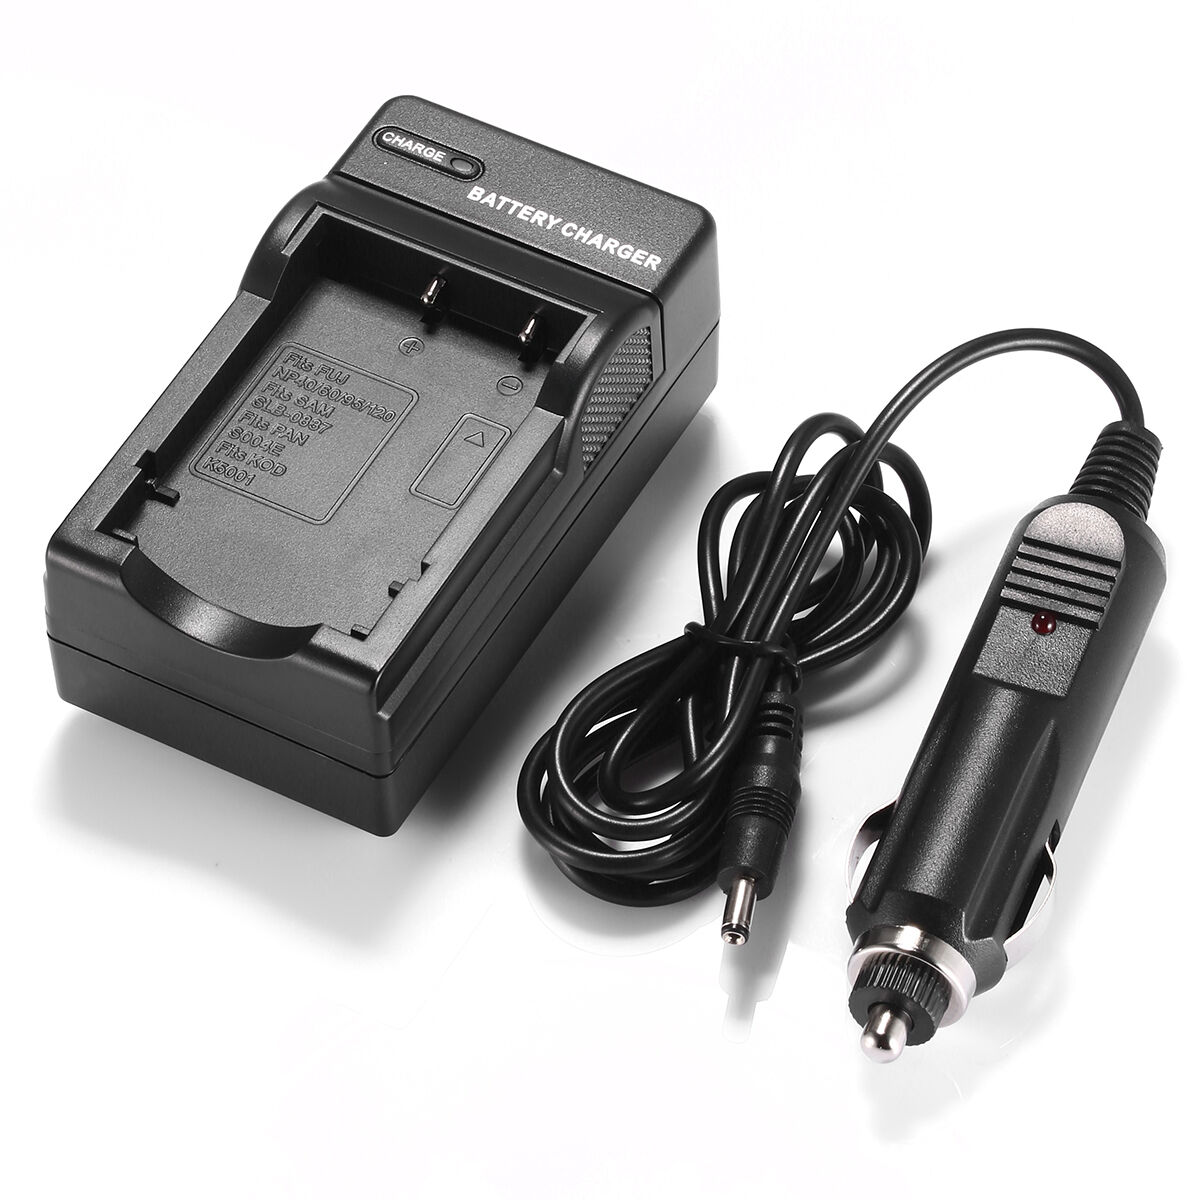 CASIO Exilim Zoom EX-Z85VP battery charger